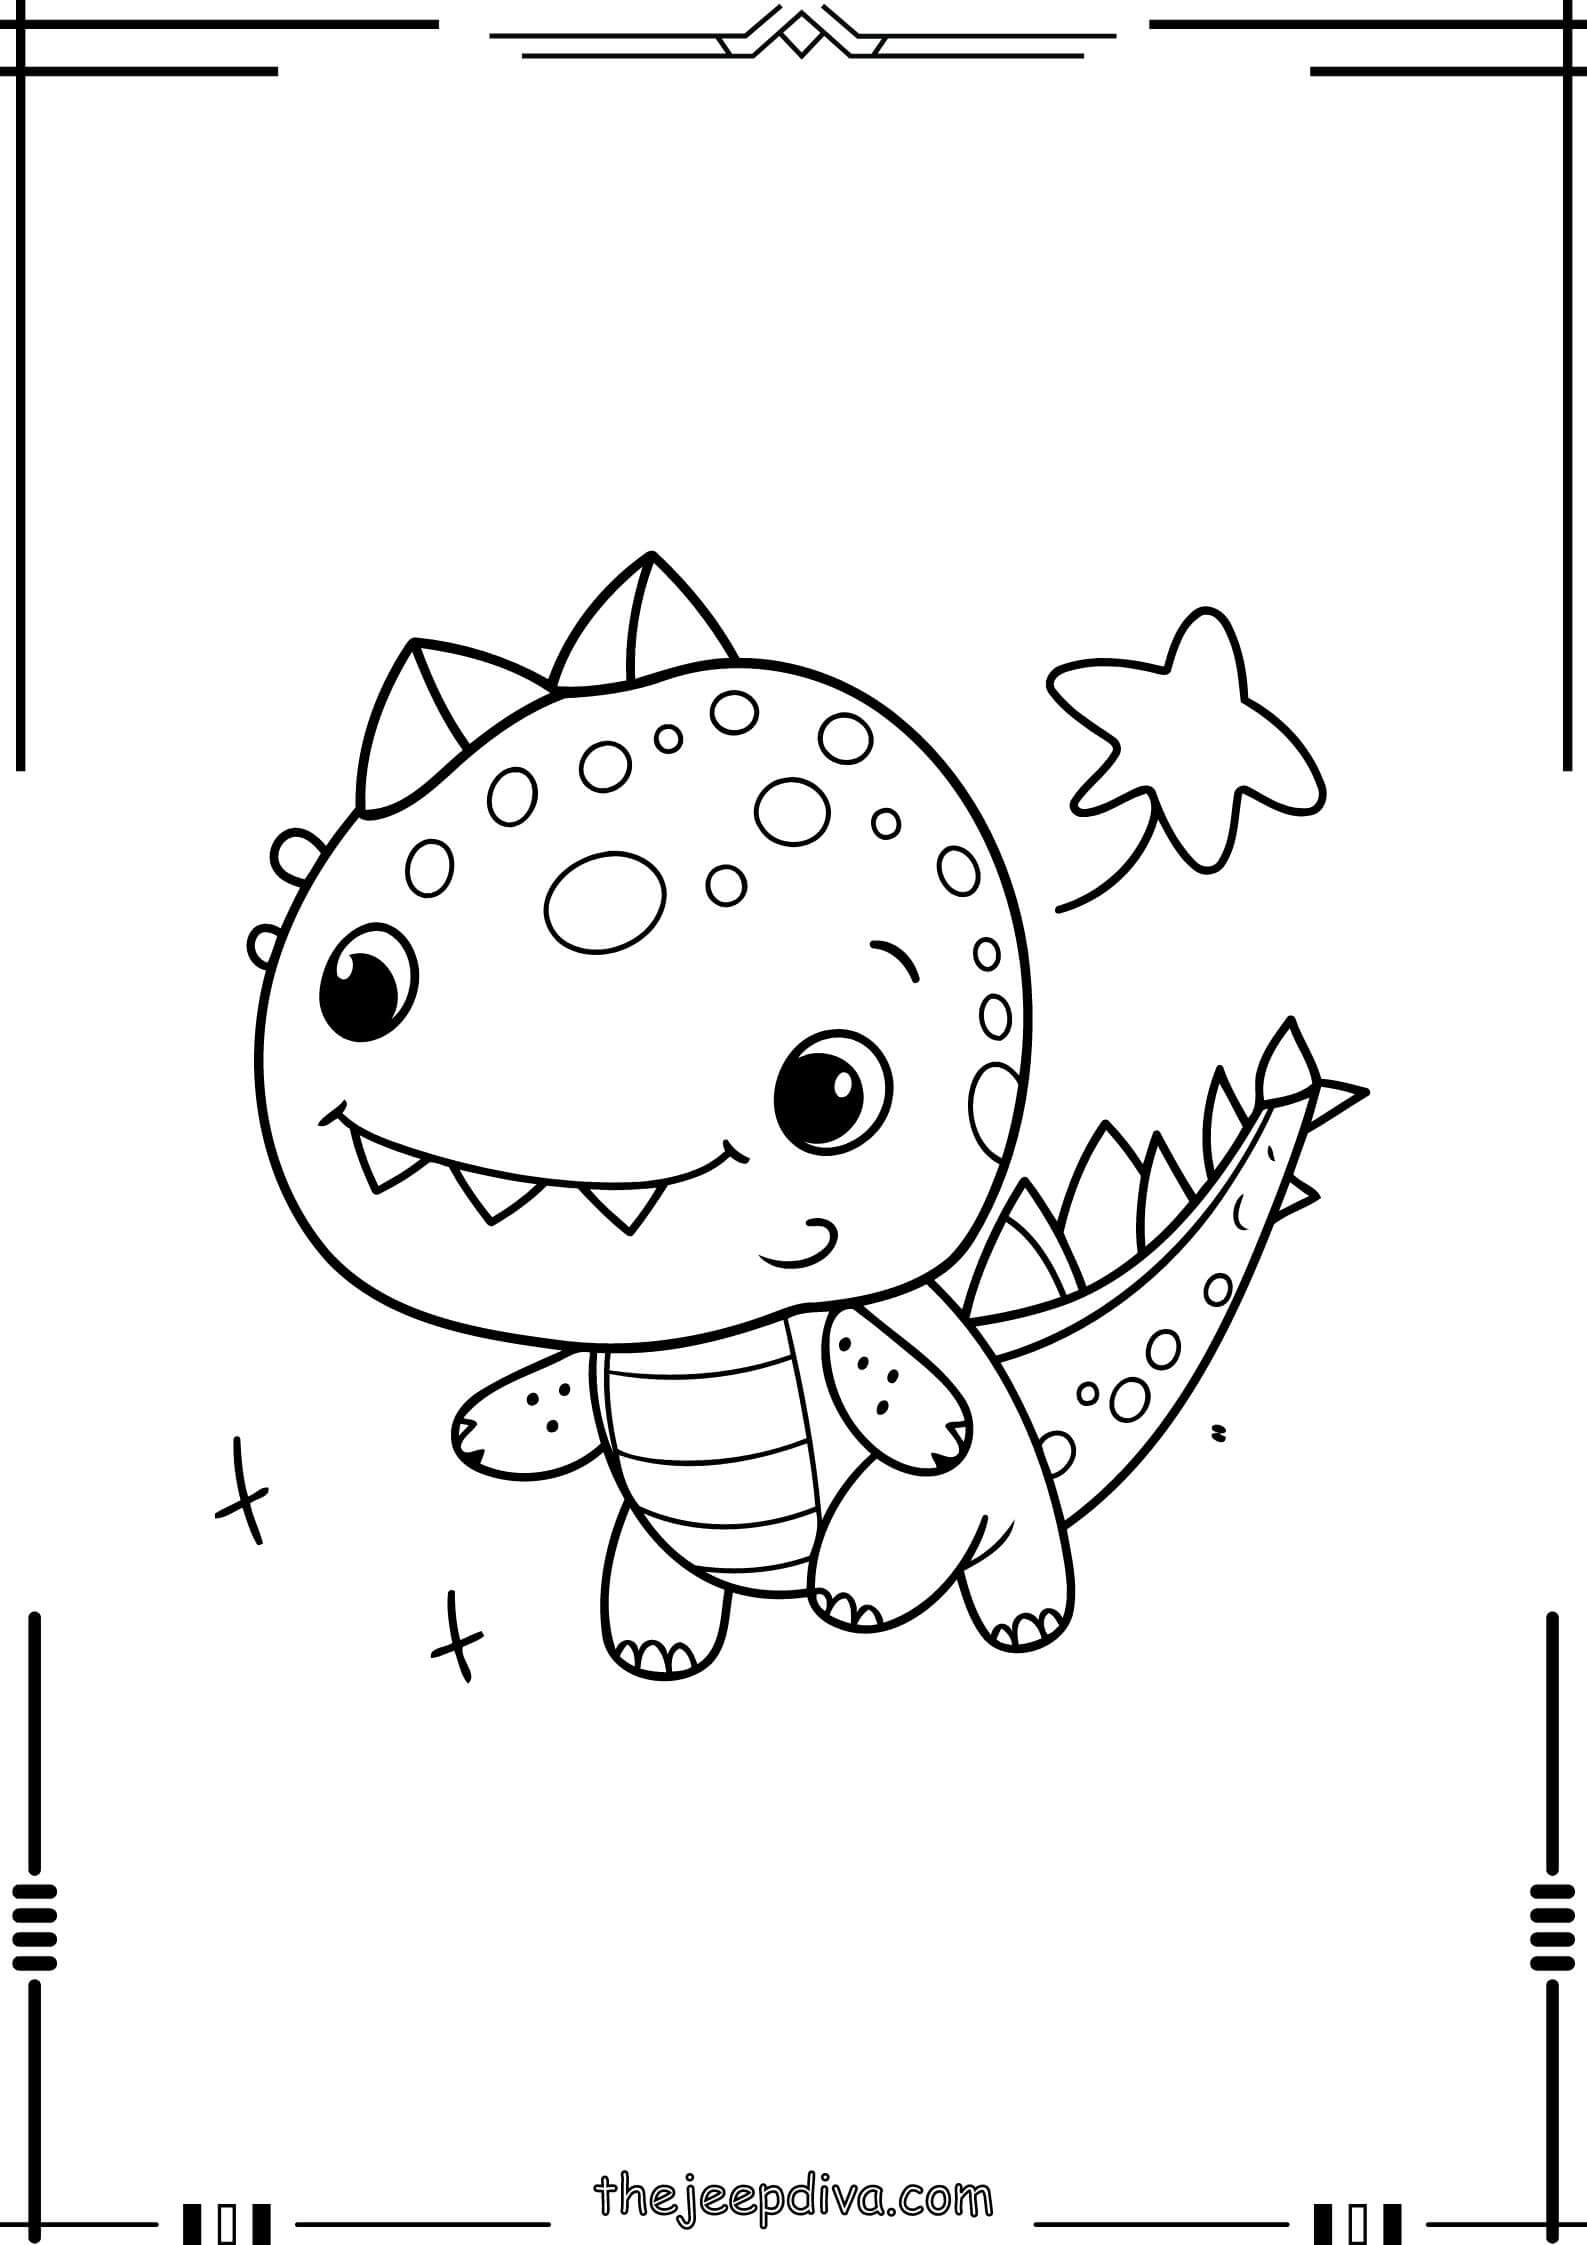 Dinosaur-Colouring-Pages-Easy-16